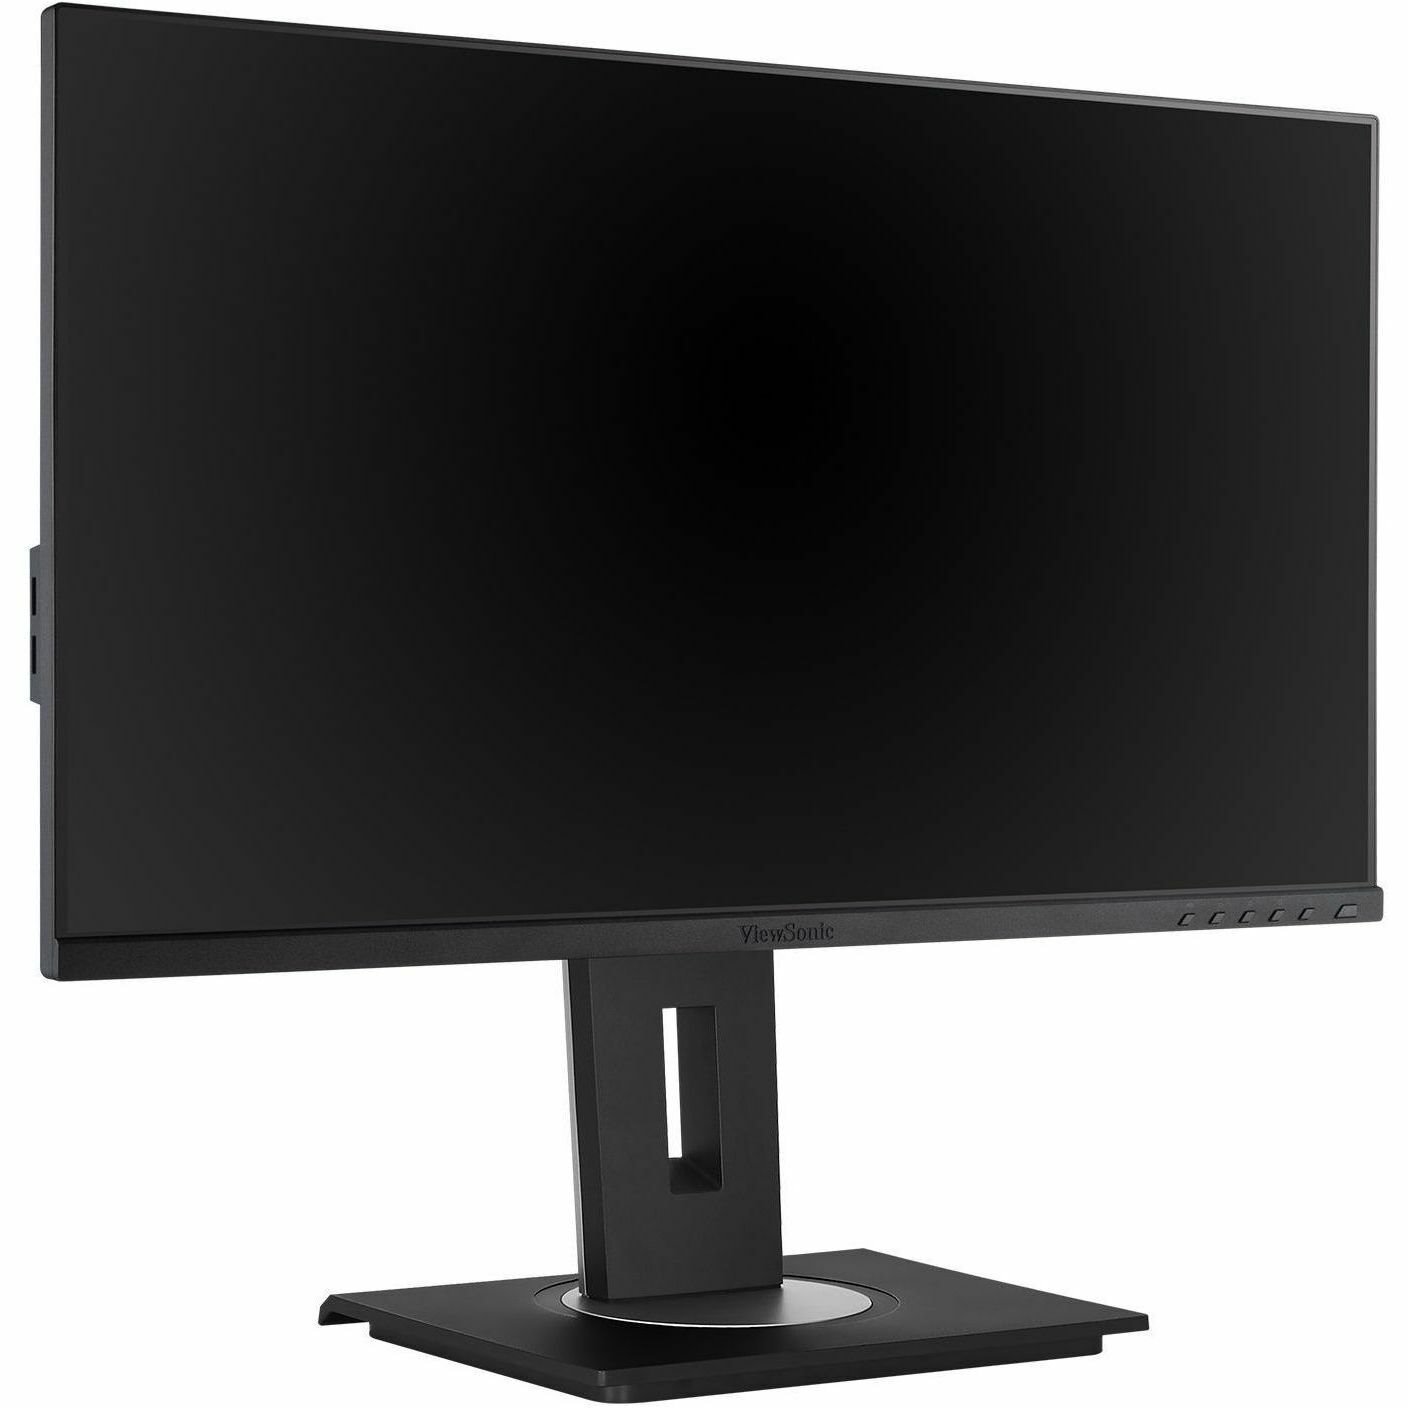 ViewSonic VG245 24 Inch IPS 1080p Monitor Designed for Surface with advanced ergonomics, 60W USB C, HDMI and DisplayPort inputs for Home and Office